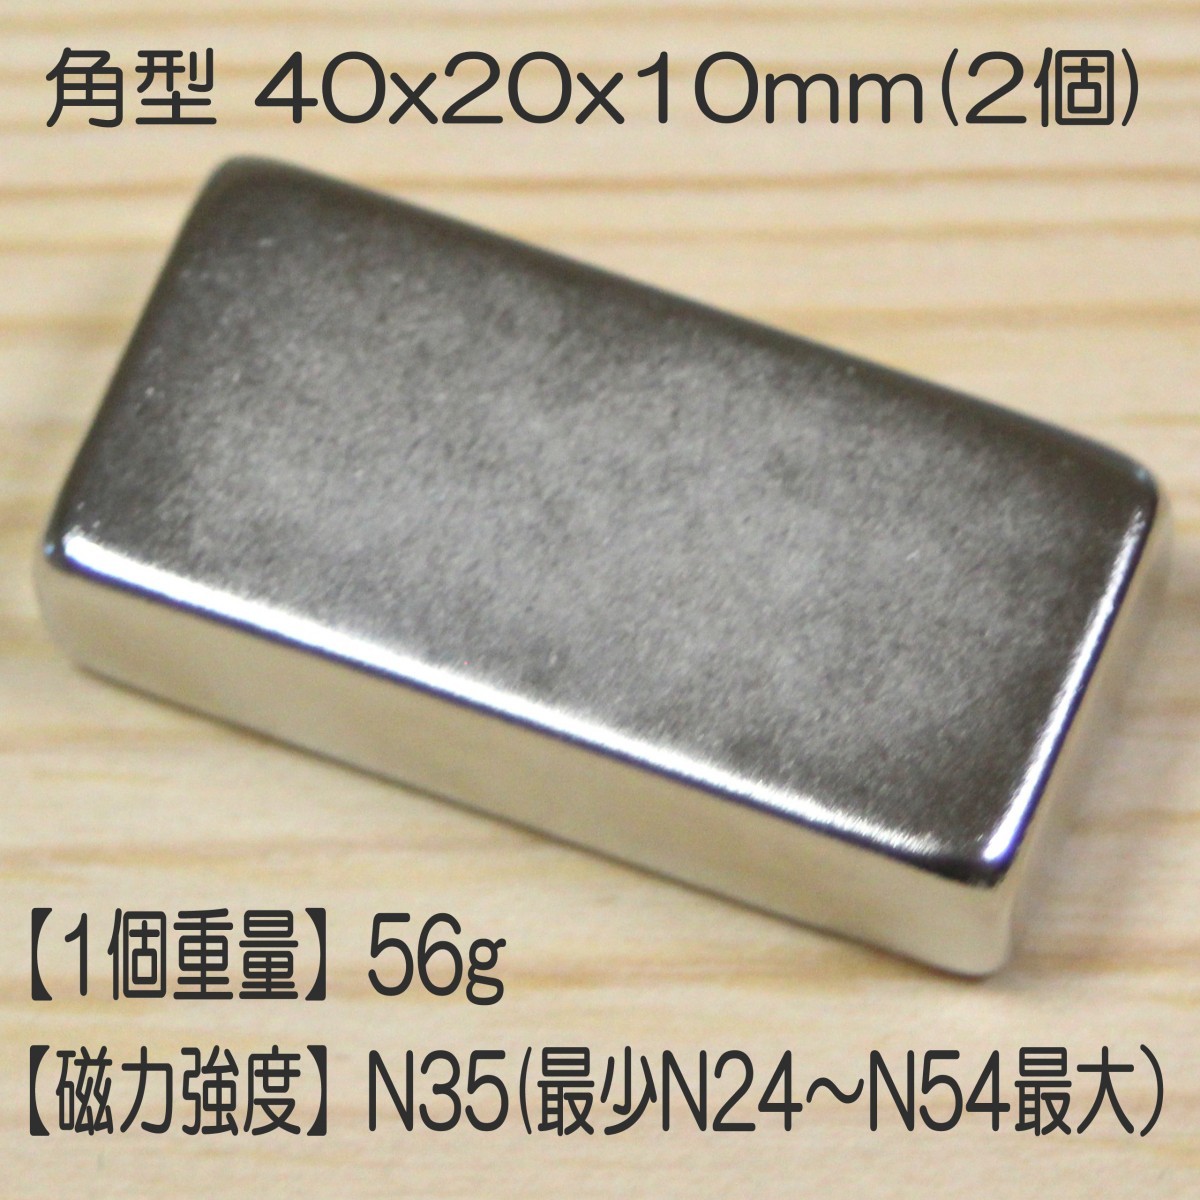  Neo Jim magnet rectangle rectangle 40x20x10mm 2 piece super powerful thickness . neodymium magnet . power powerful magnet permanent magnet DIY Sunday large . construction experiment raw materials I der practical use convenience 